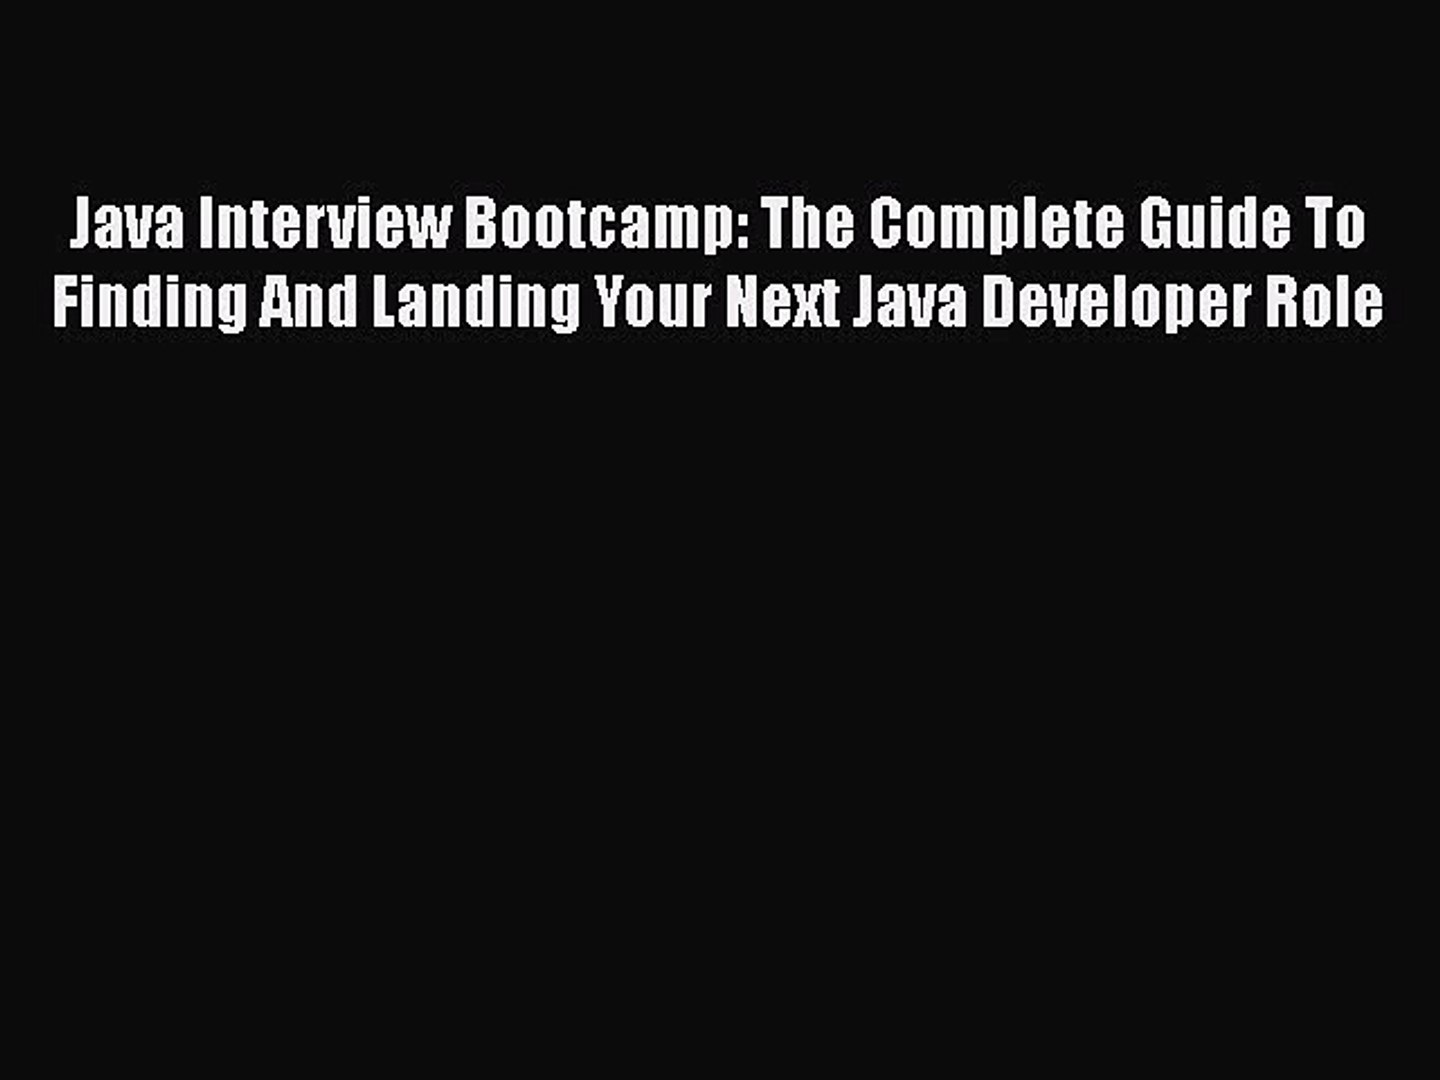 [Read book] Java Interview Bootcamp: The Complete Guide To Finding And Landing Your Next Java